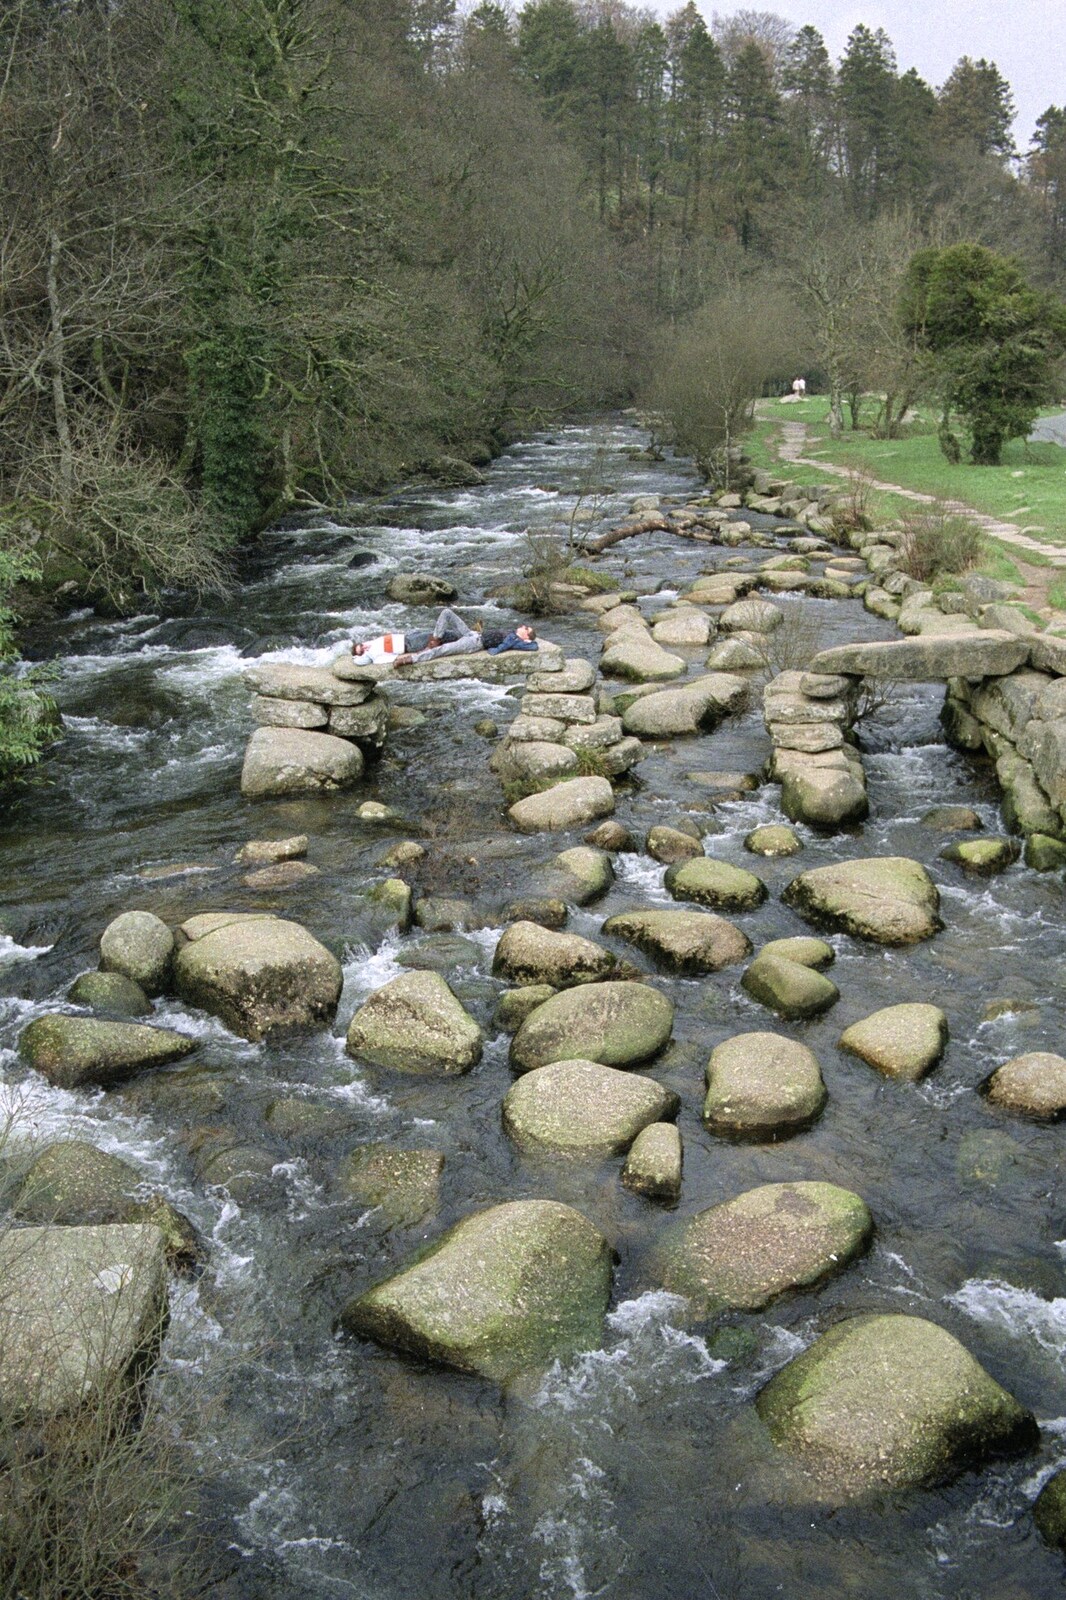 A Trip to Plymouth and Bristol, Avon and Devon - 18th February 1990: The river at Badger's Holt, Dartmoor